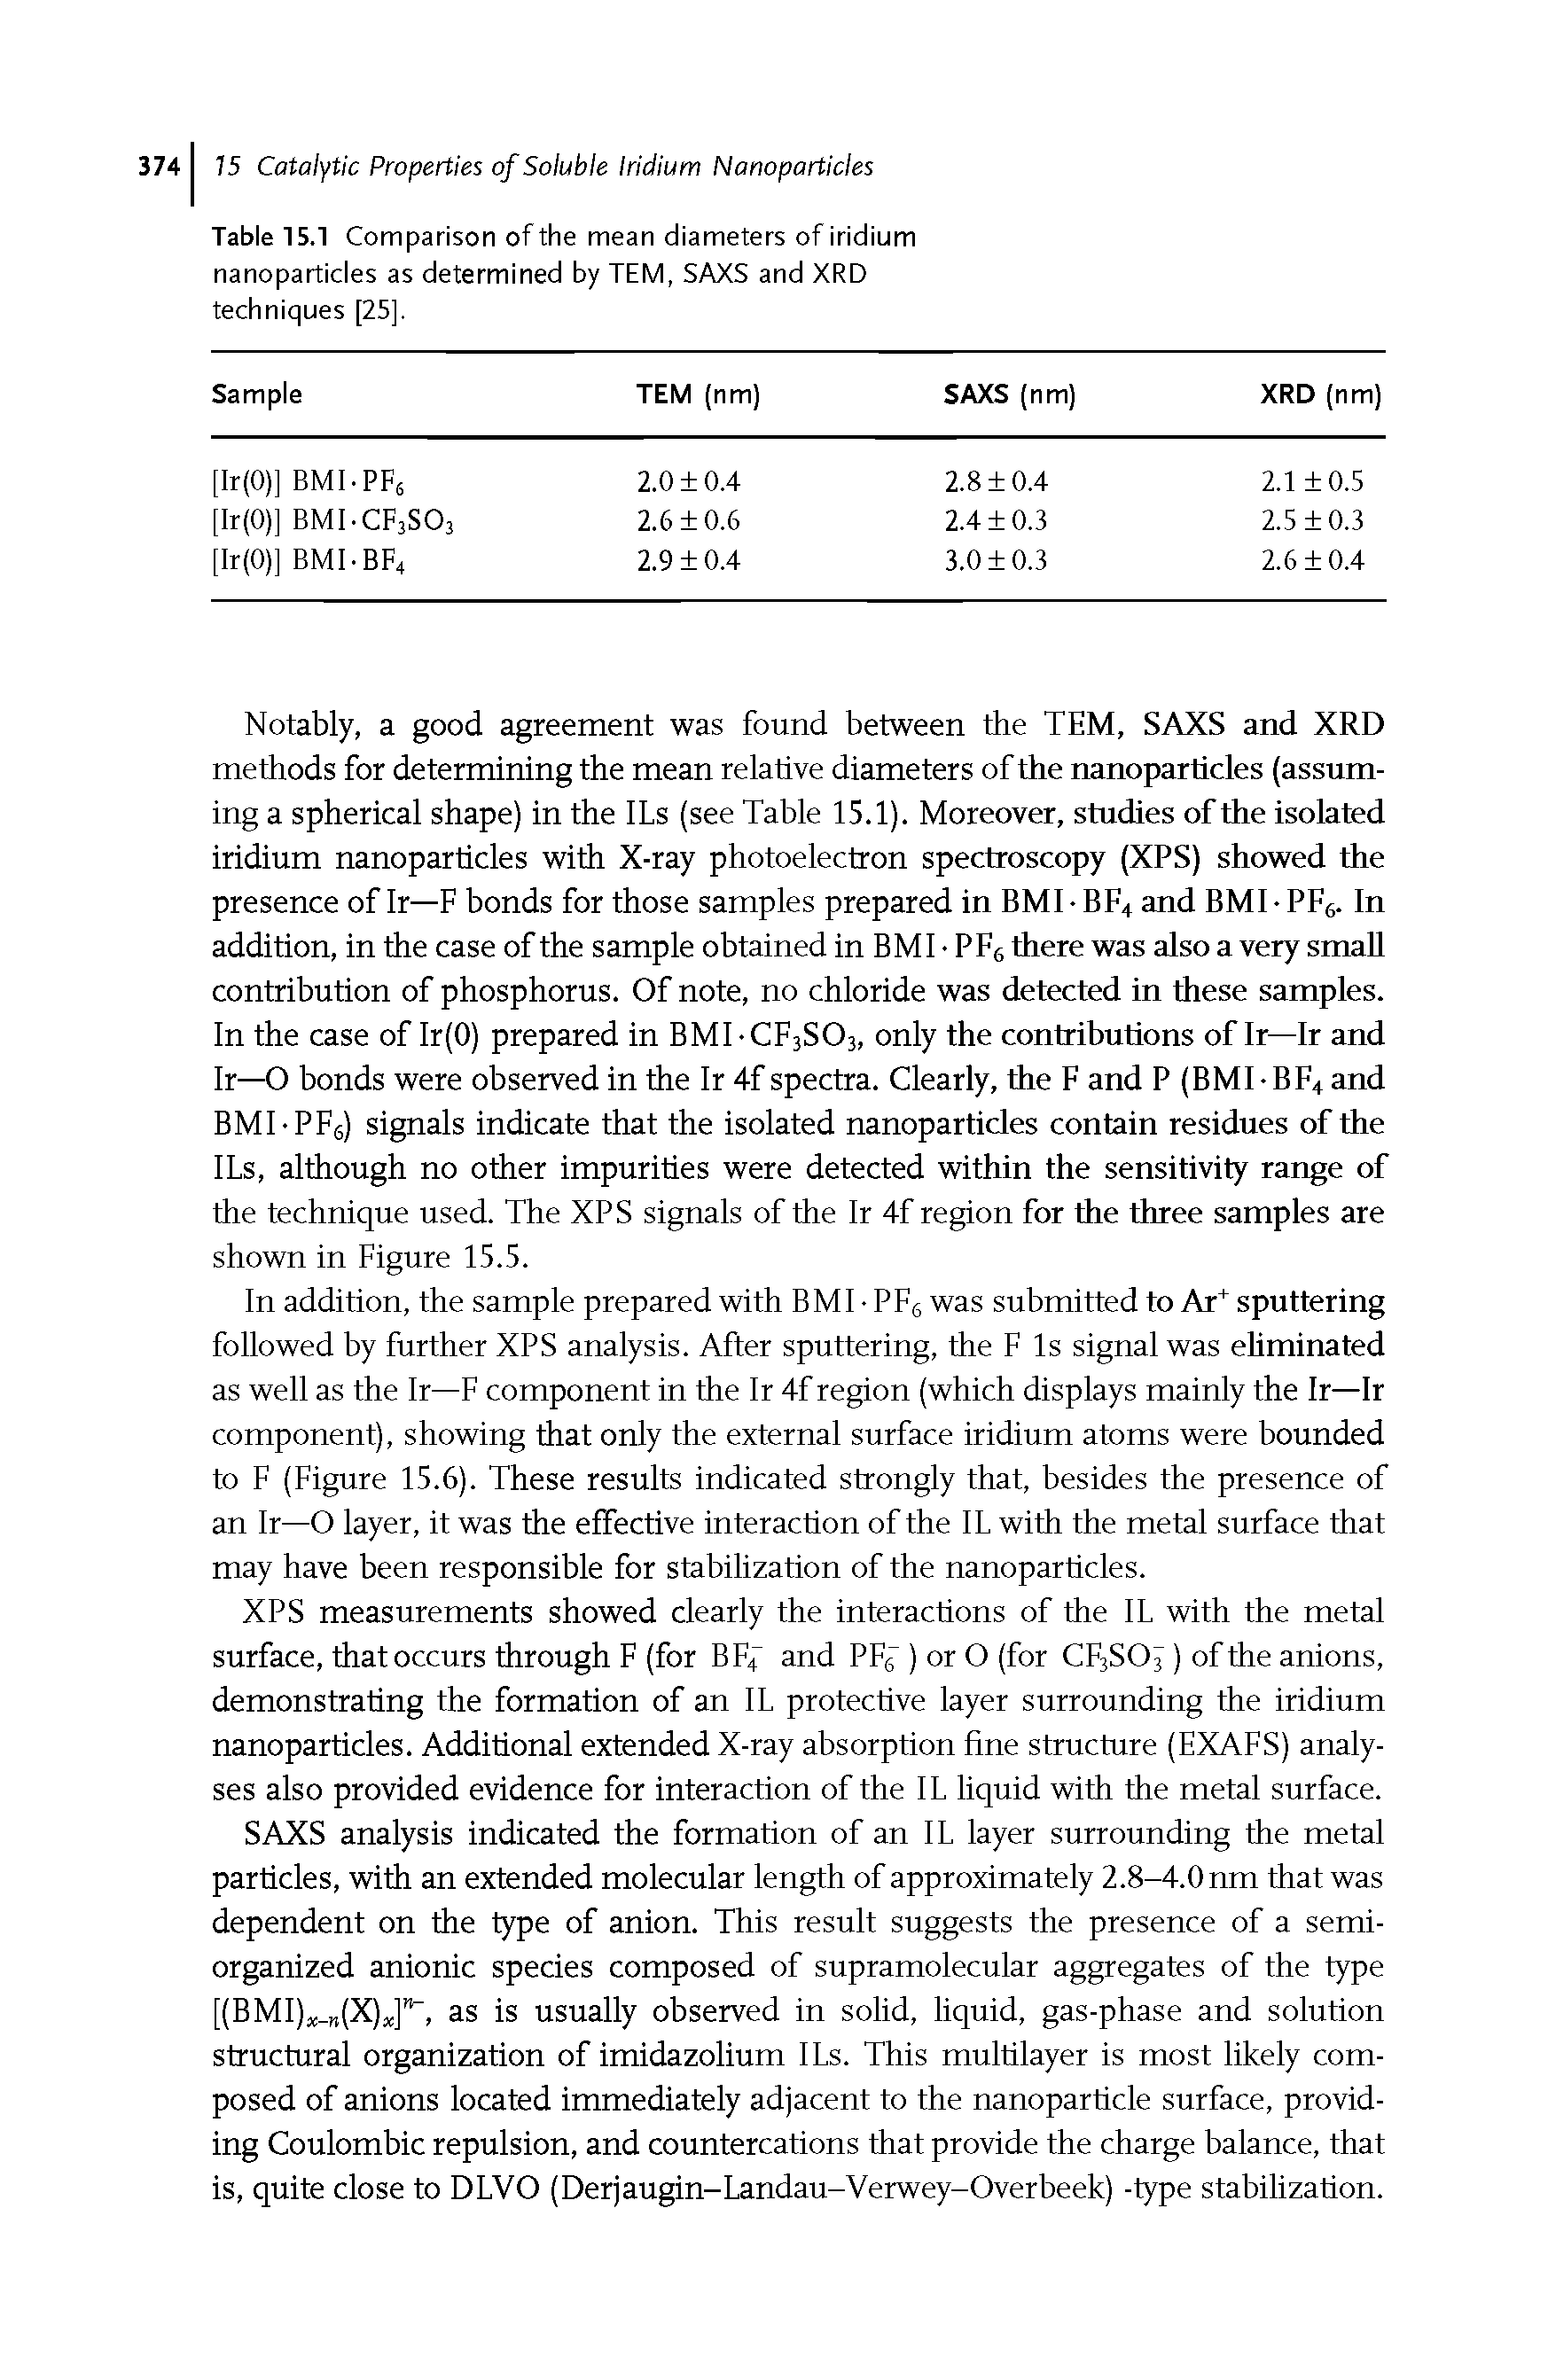 Table 15.1 Comparison of the mean diameters of iridium nanoparticles as determined by TEM, SAXS and XRD techniques [25],...